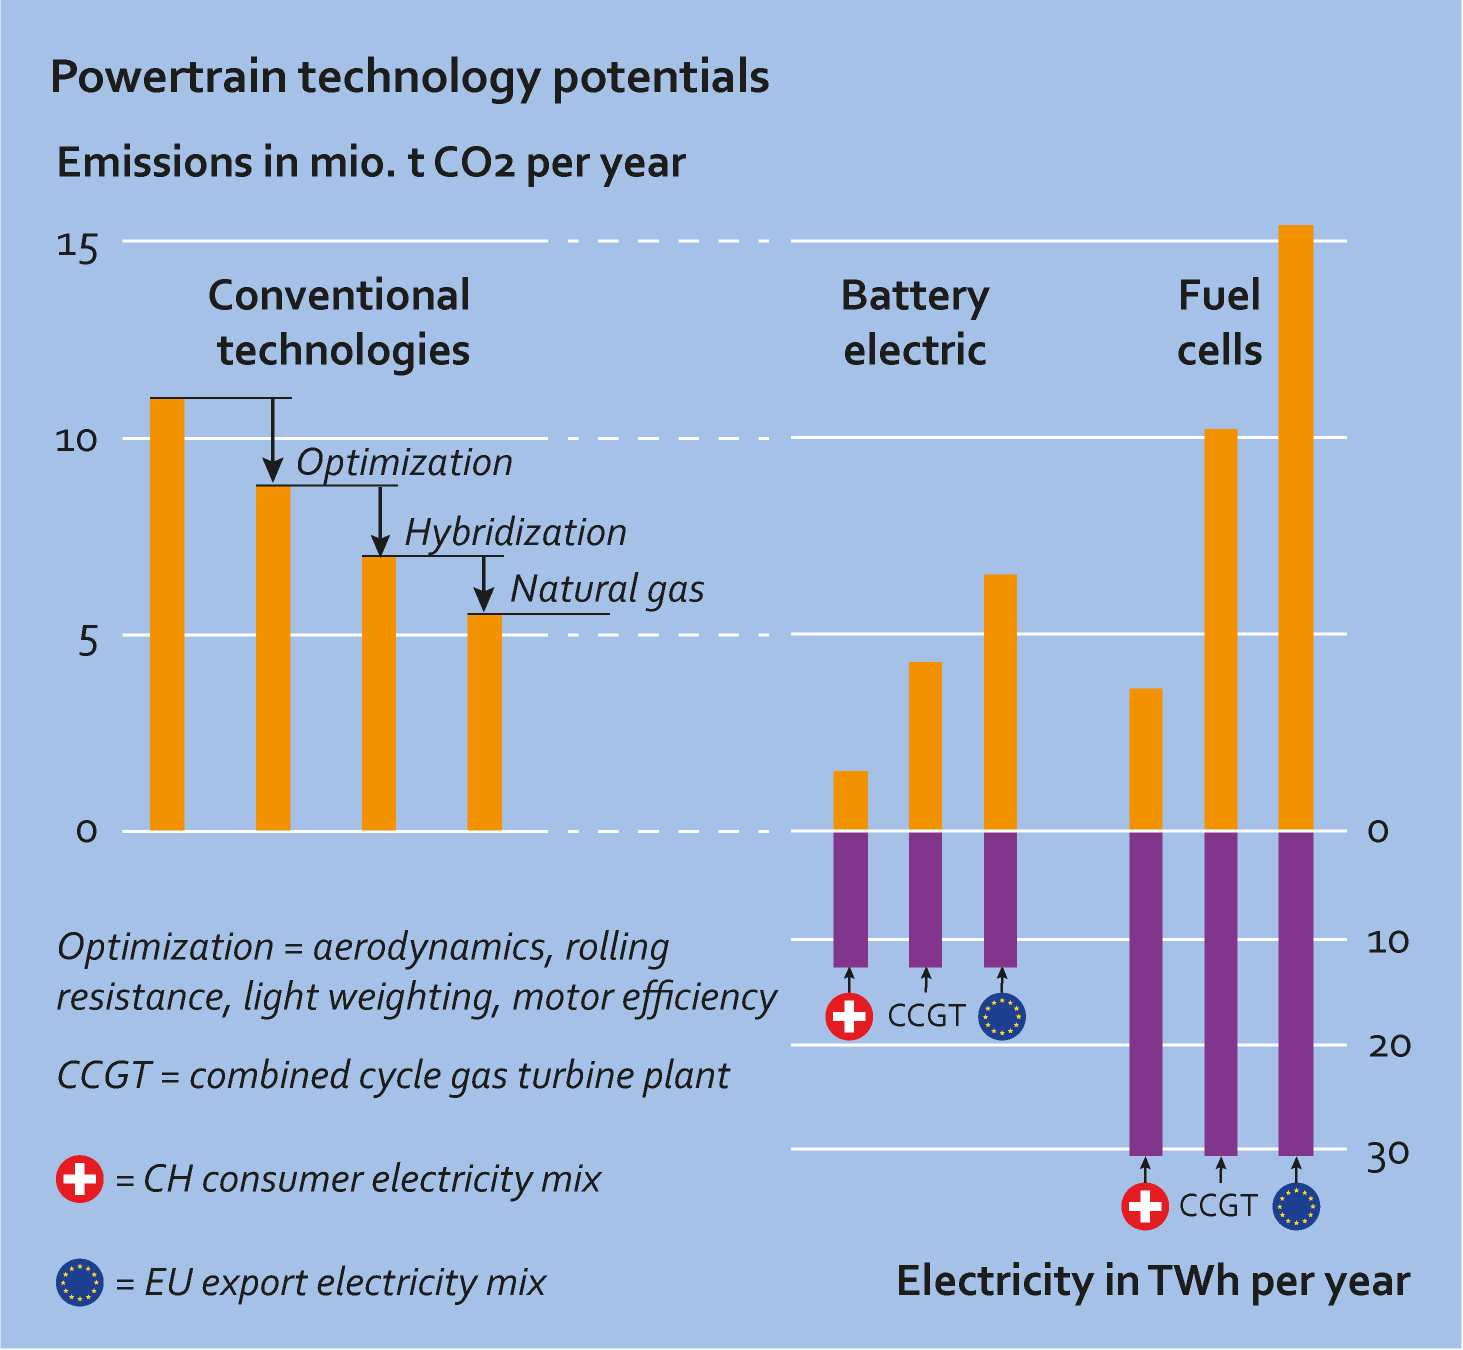 Enlarged view: Powertrain technology potentials